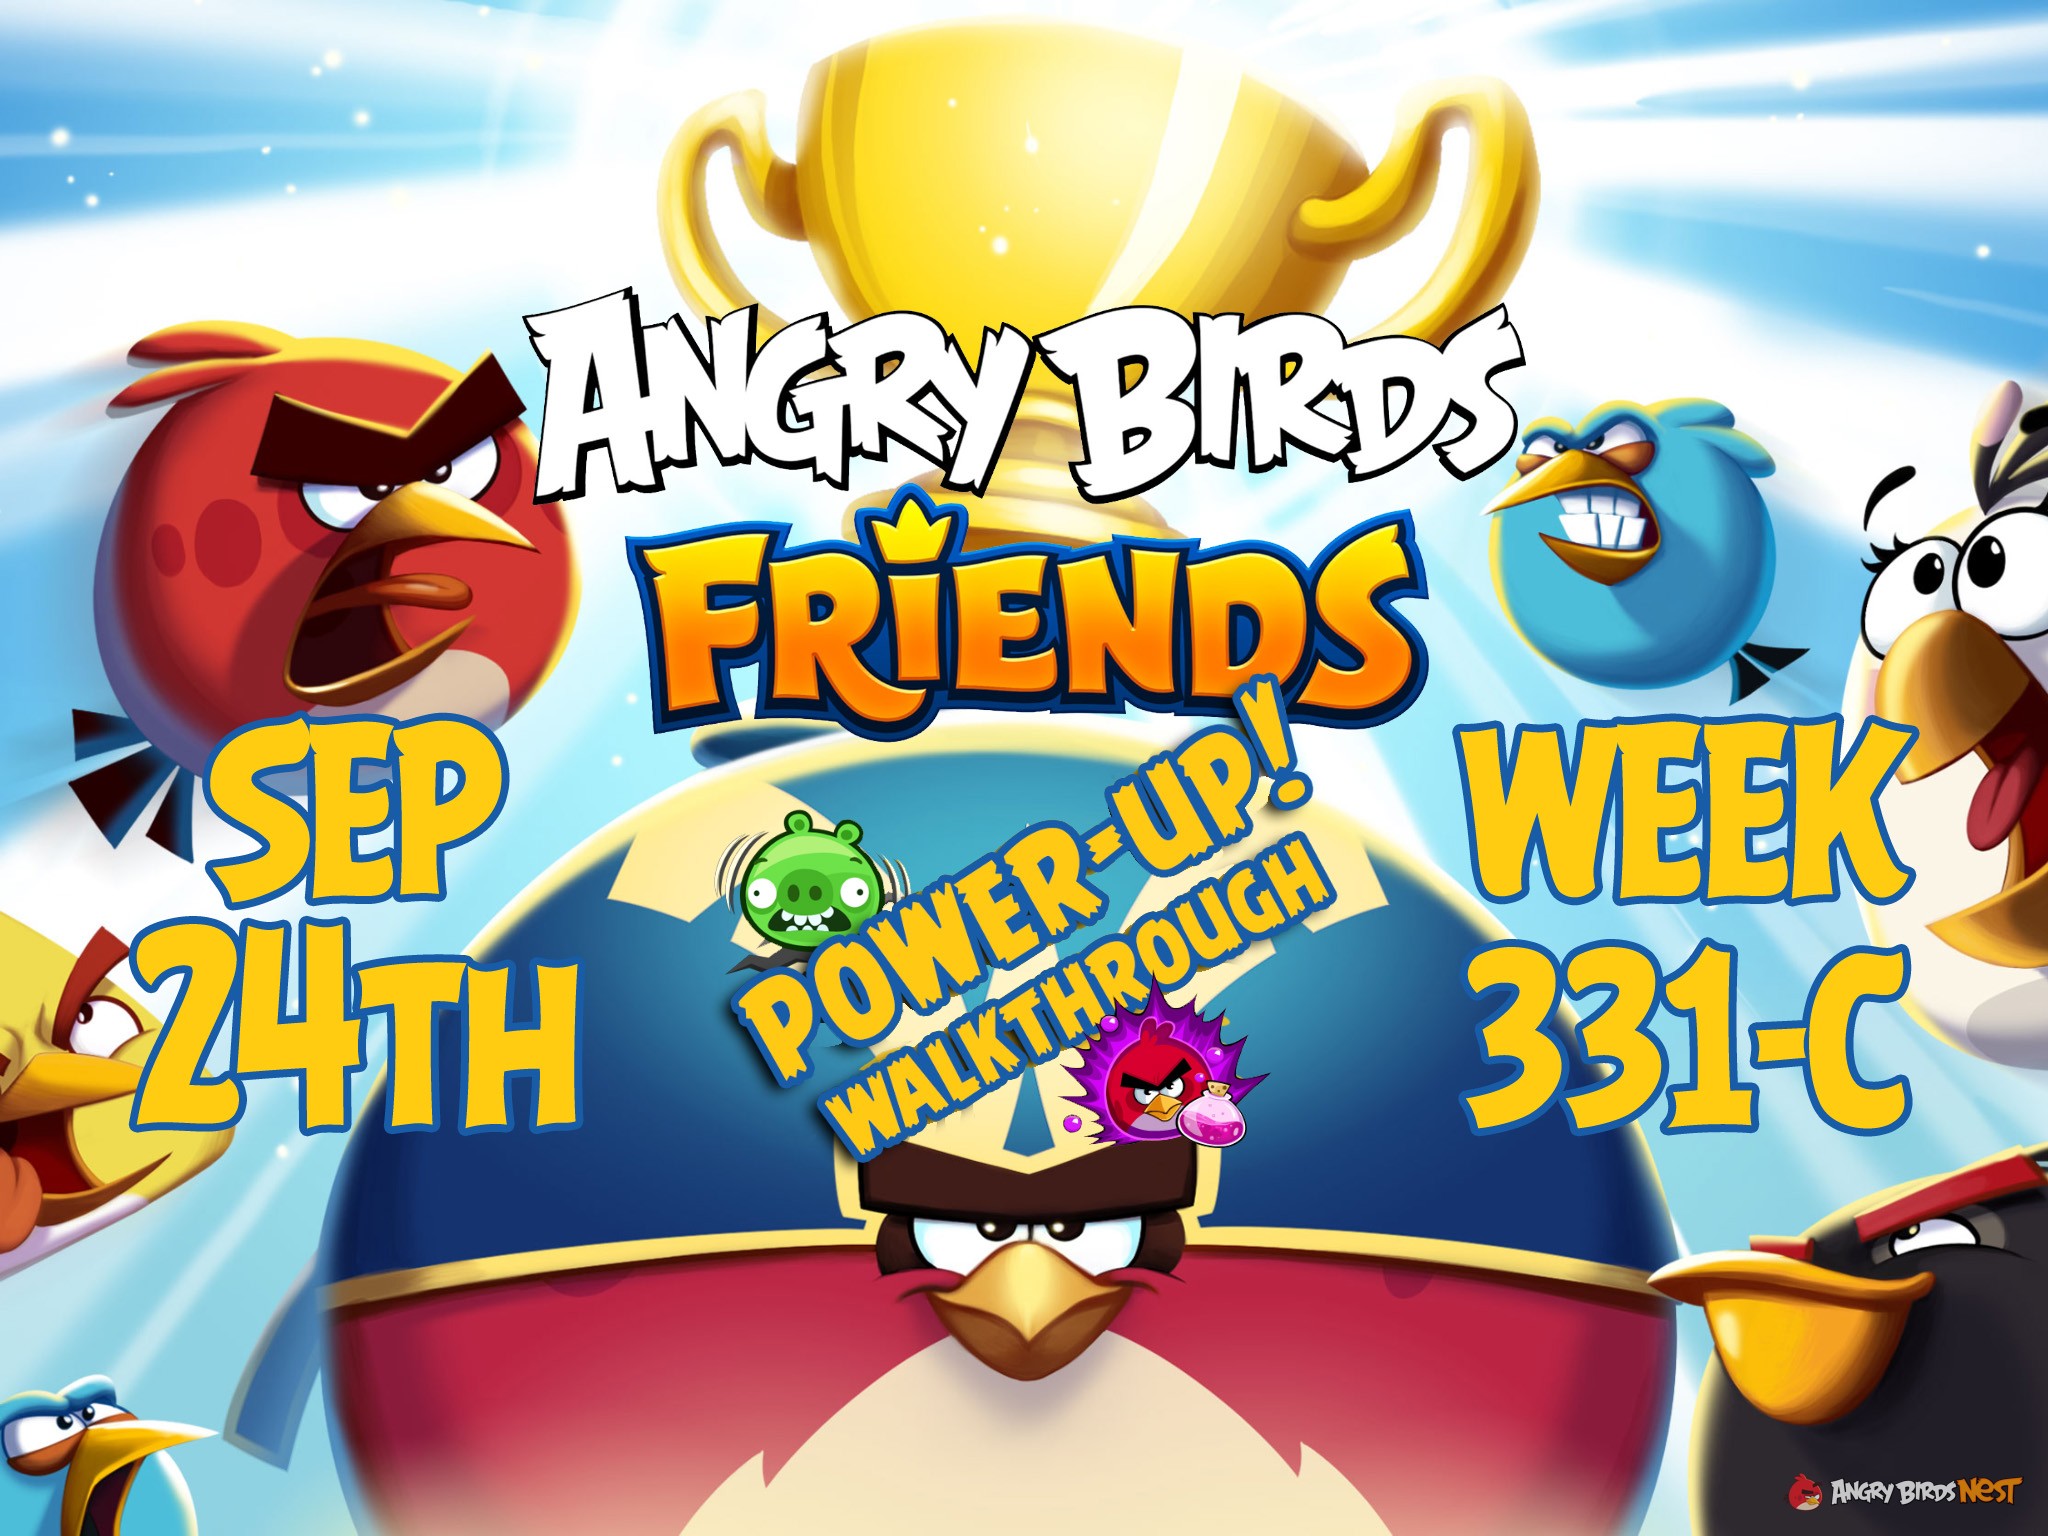 Angry-Birds-Friends-Tournament-Week-331-C-Feature-Image-PU